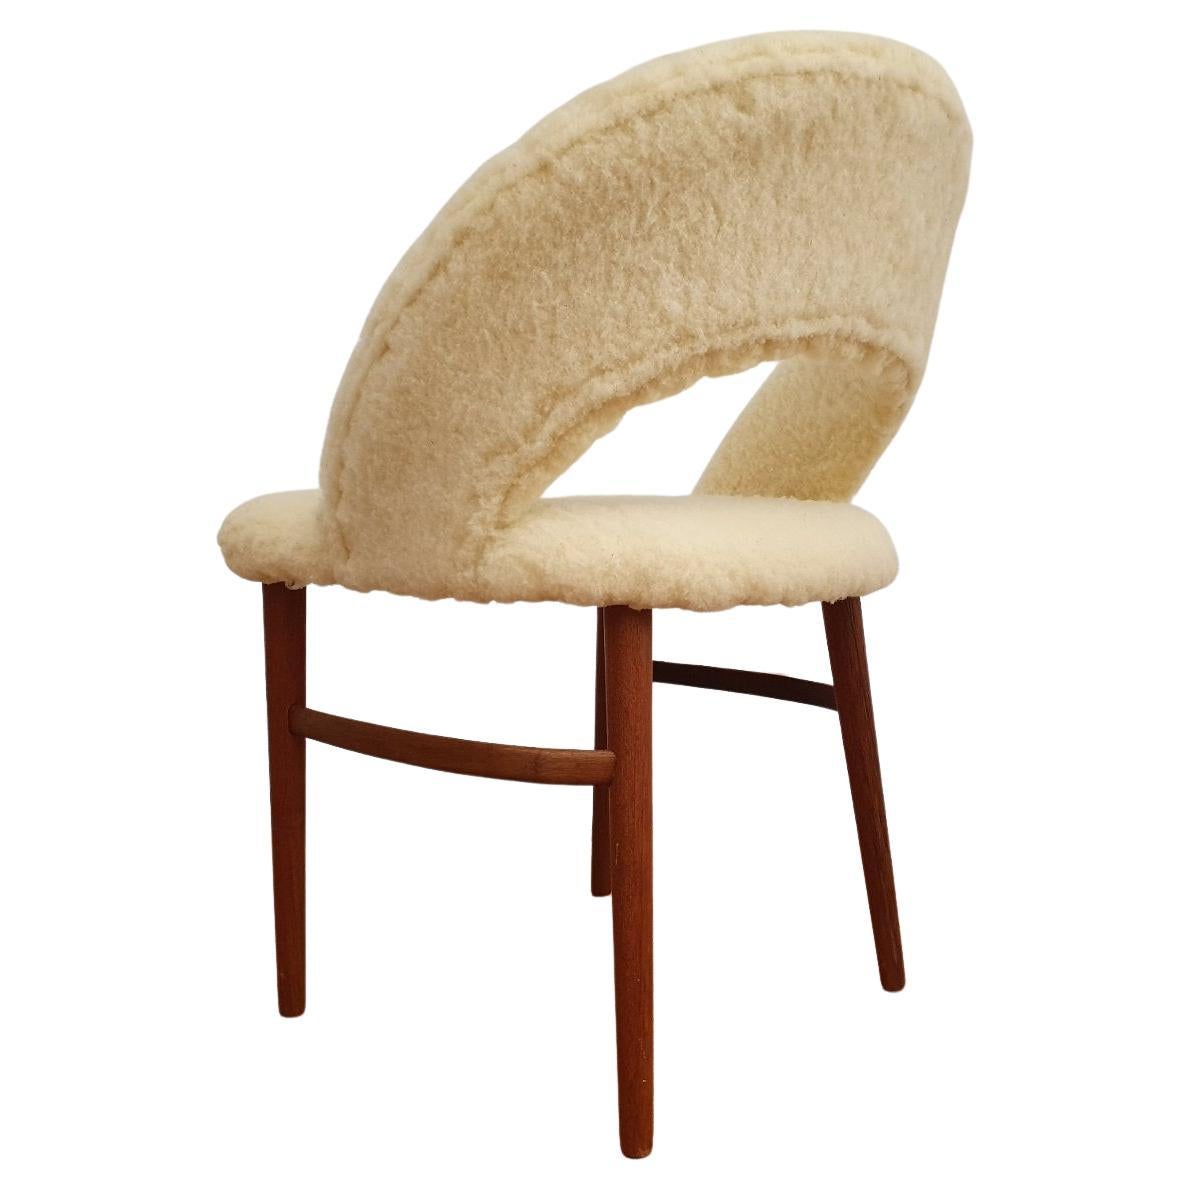 Danish design by Frode Holm, make up chair, 60s, completely reupholstered For Sale